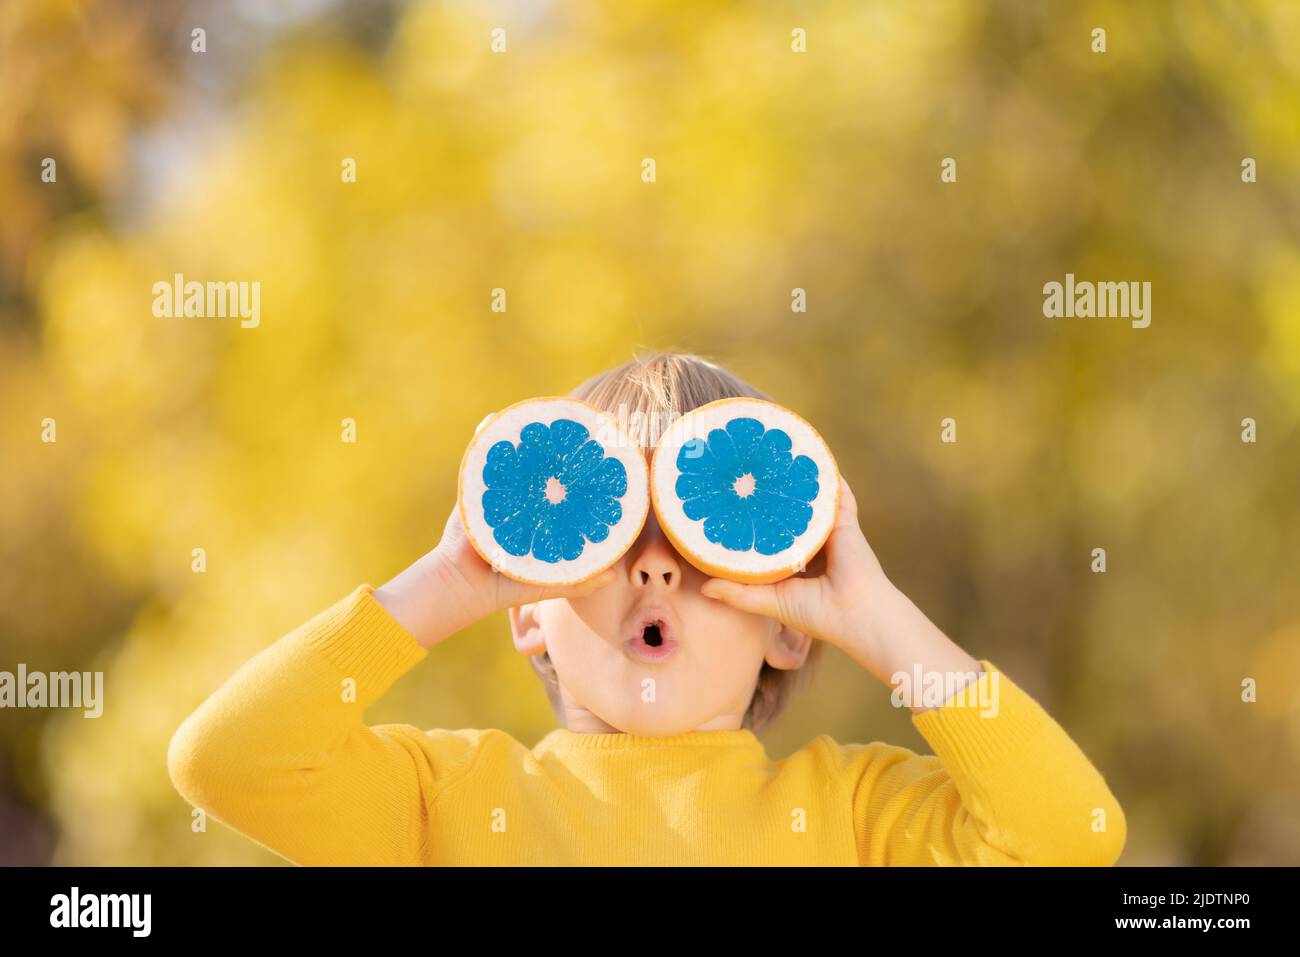 Surprised child holding slices of blue orange fruit like sunglasses. Kid against yellow autumn leaves background. Healthy eating and strange things co Stock Photo